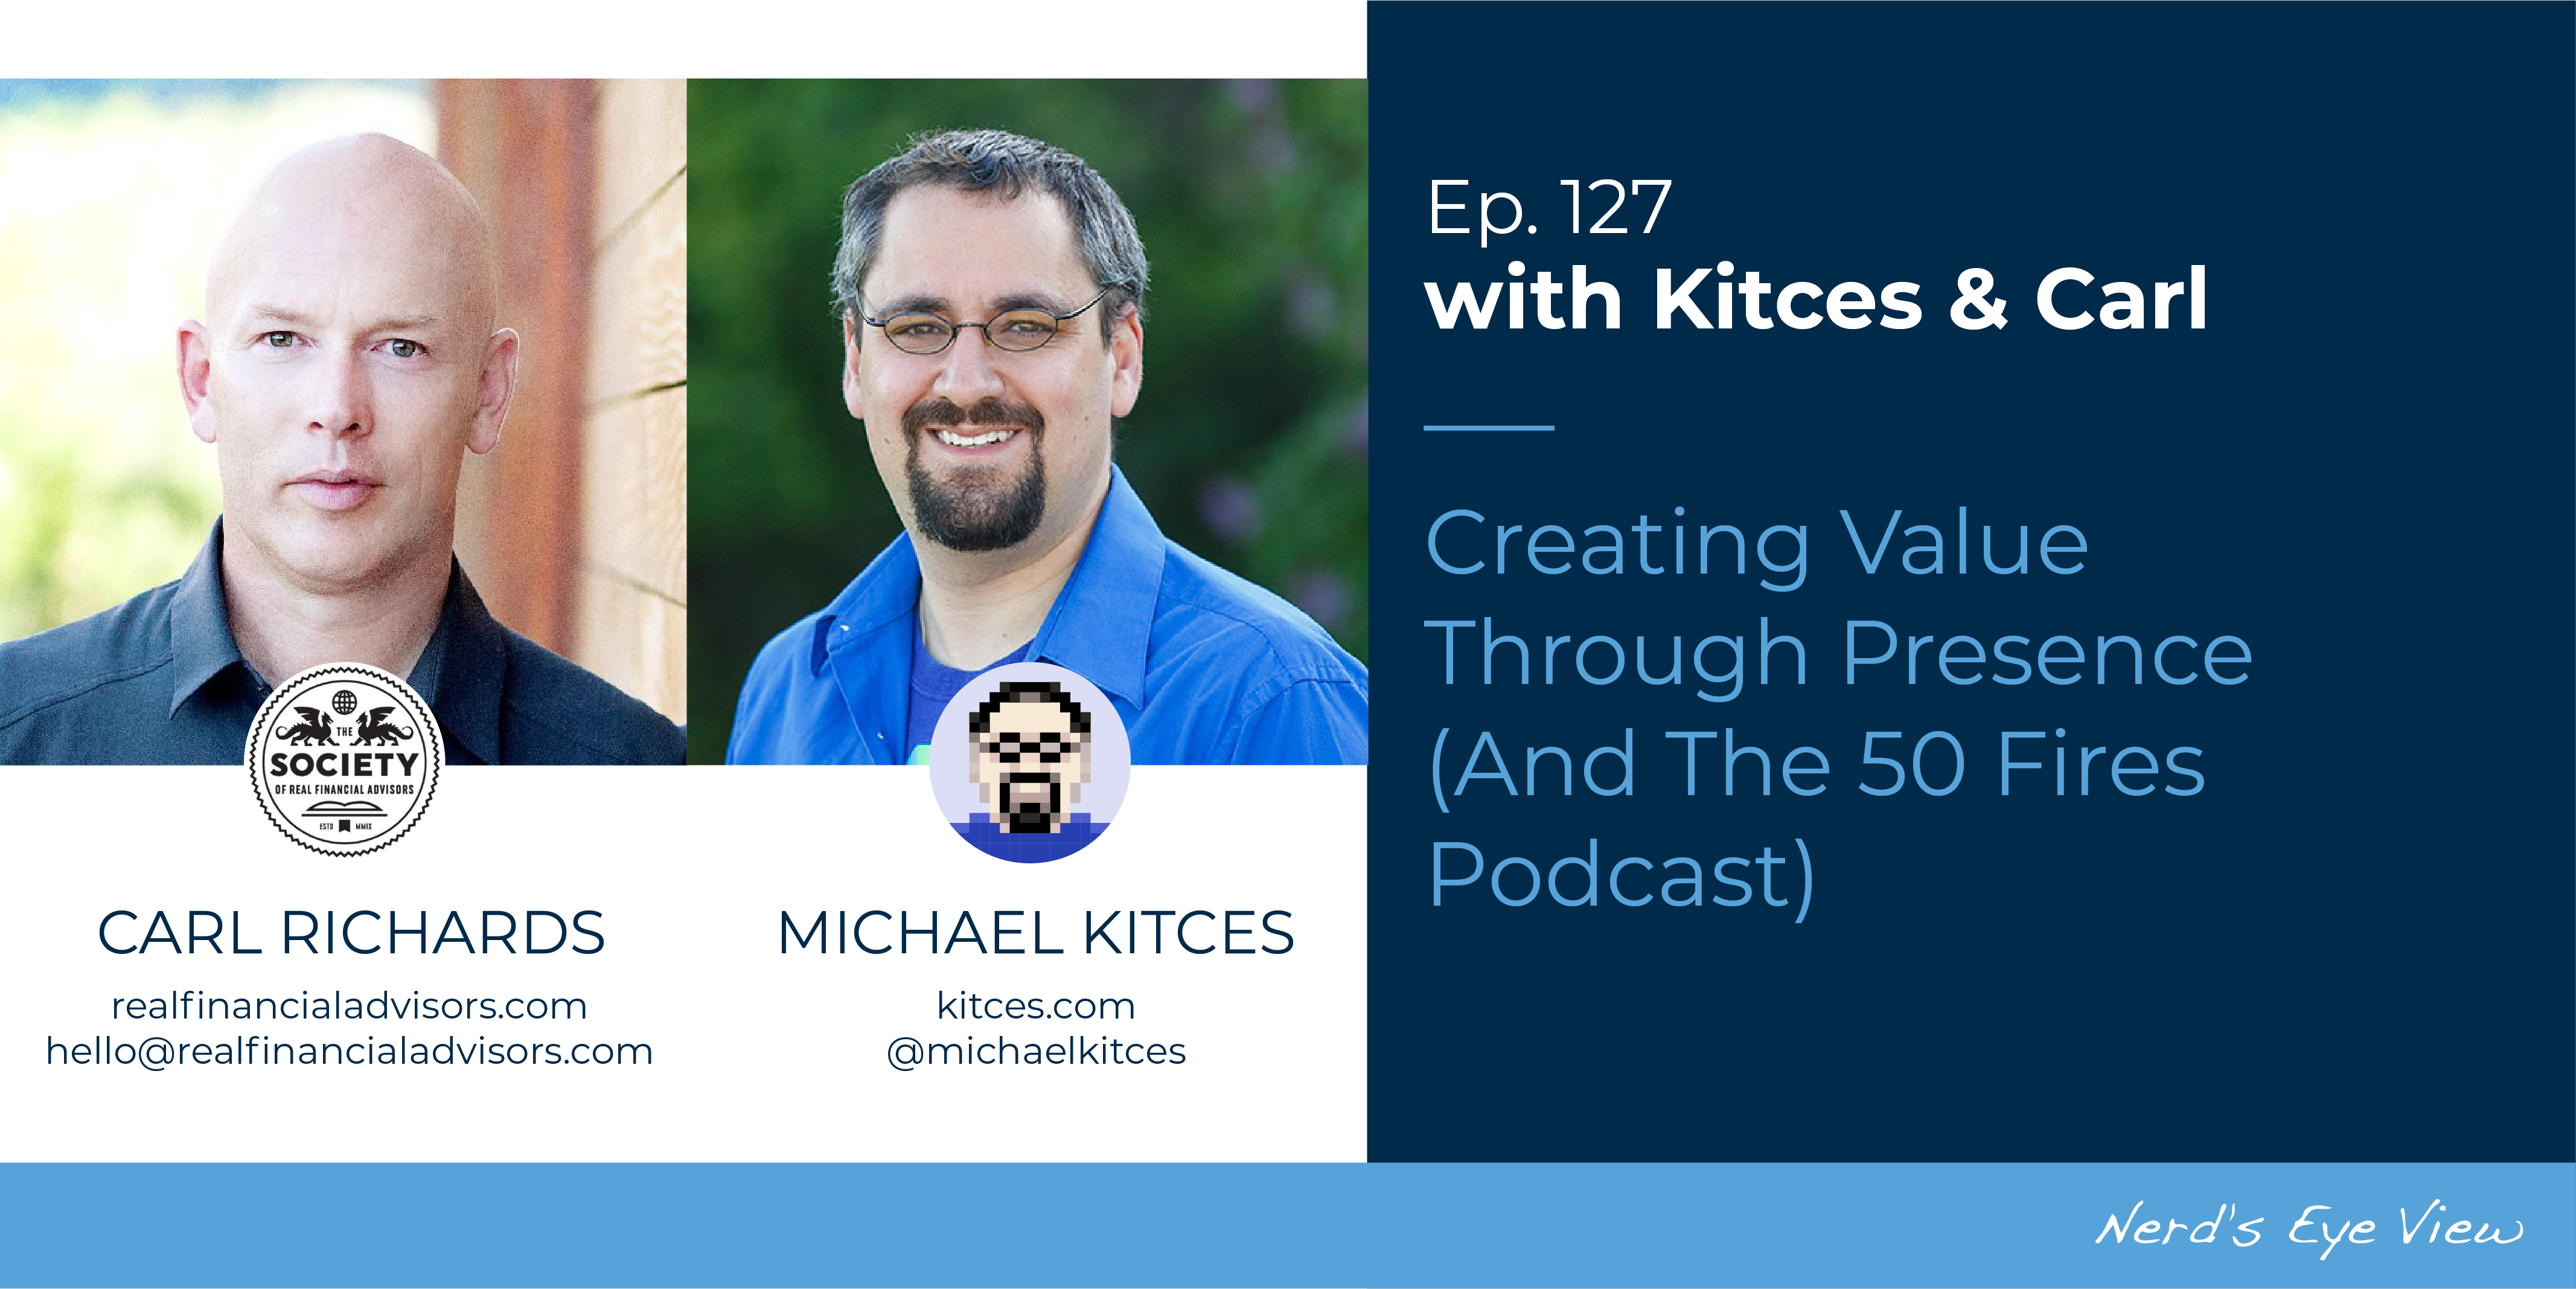 Kitces & Carl Ep 127: Creating Worth By means of Presence (And The 50 Fires Podcast)